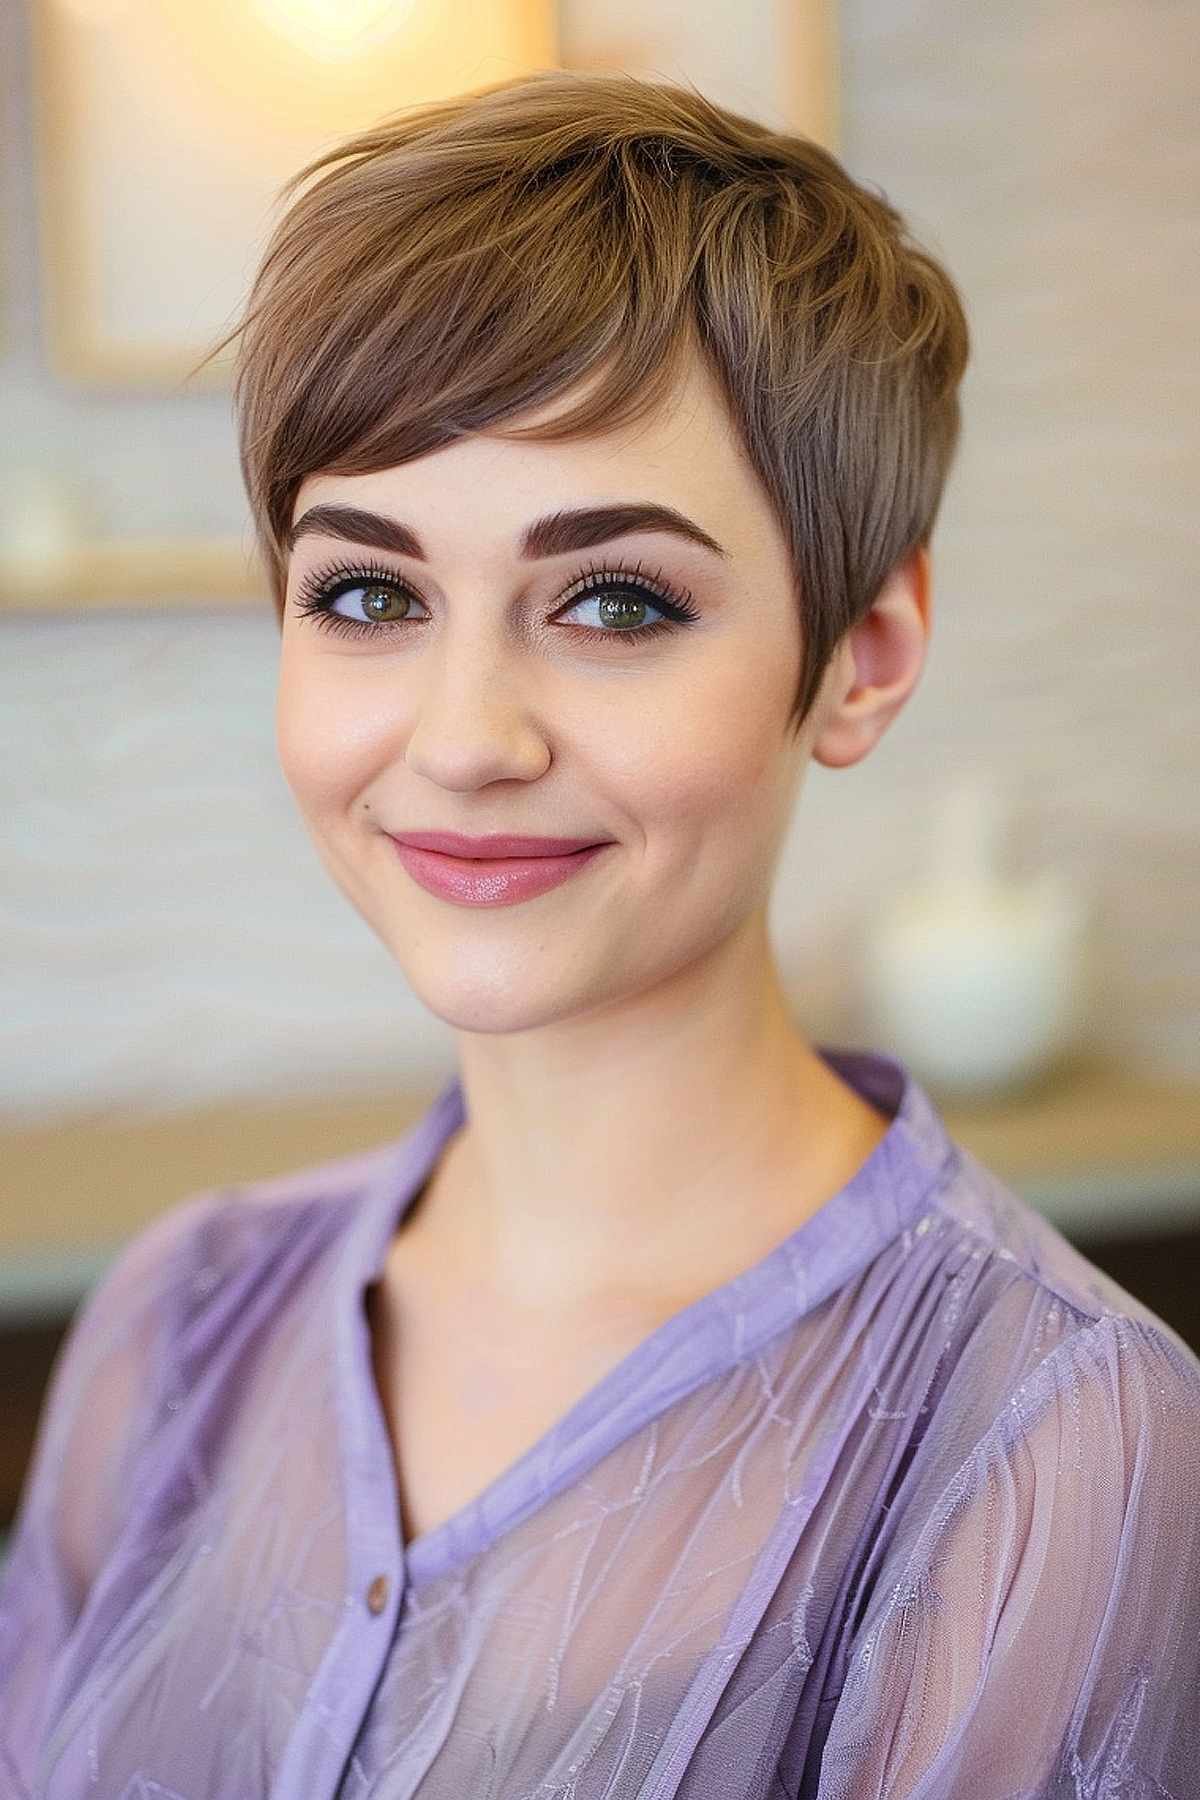 Woman with a neat feathered pixie cut featuring subtle bangs and fine texturing, perfect for creating volume on thinner hair.